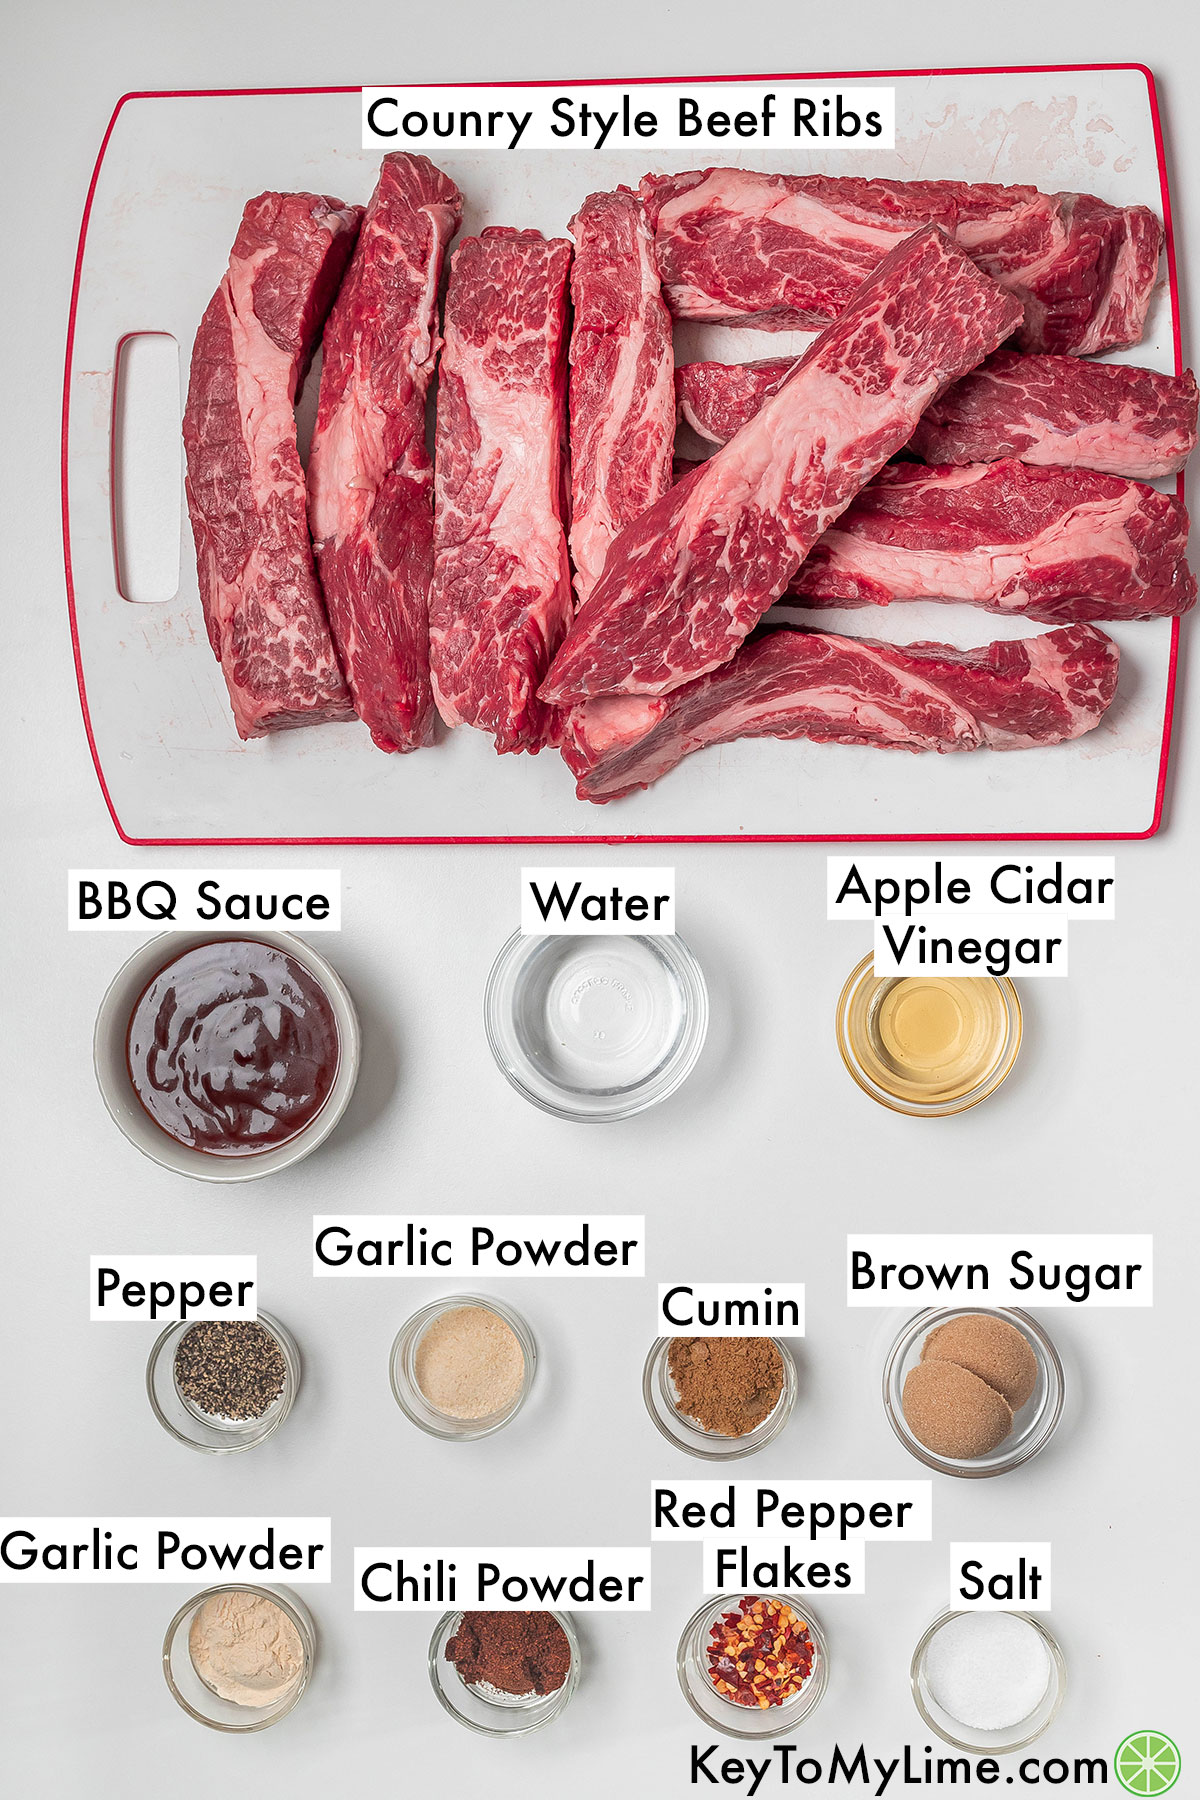 The labeled ingredients for country style beef ribs.